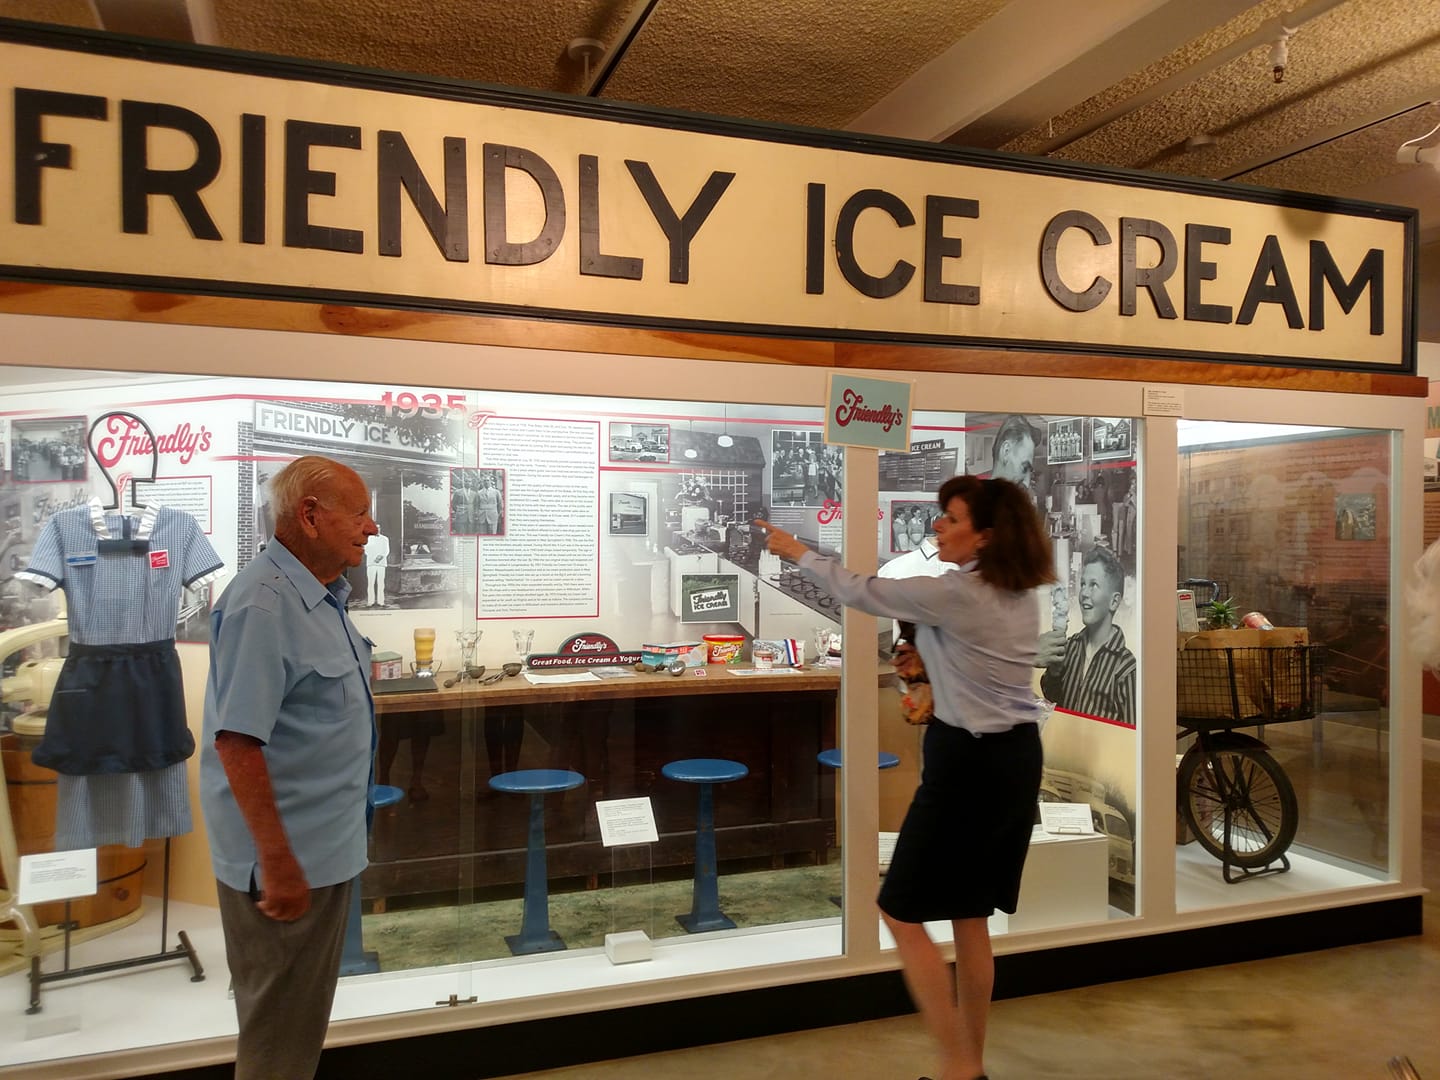 Old man stands in front of exhibit of Friendly Ice Cream while woman points to objects in the exhibit